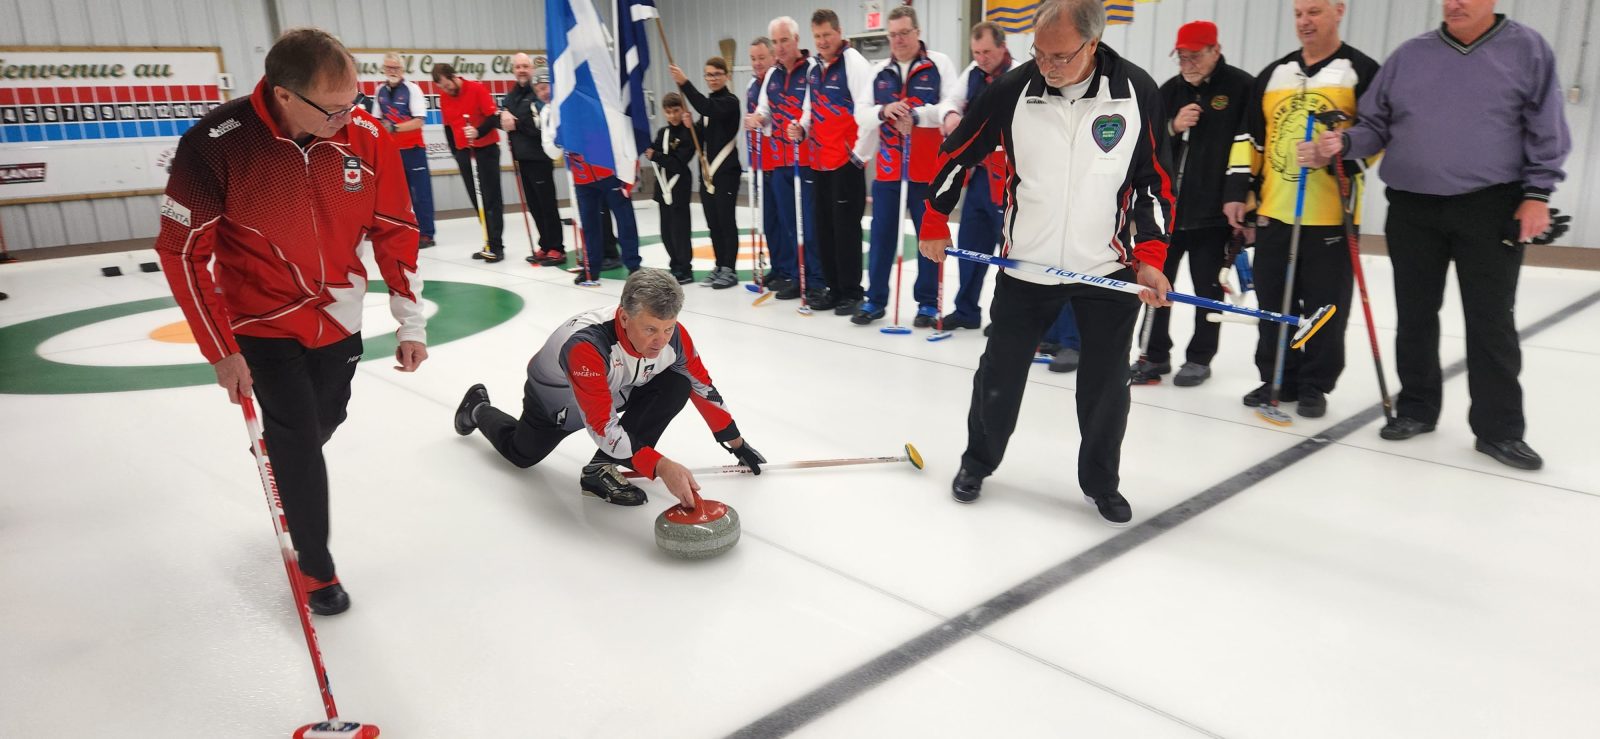 Russell hosts curling cup